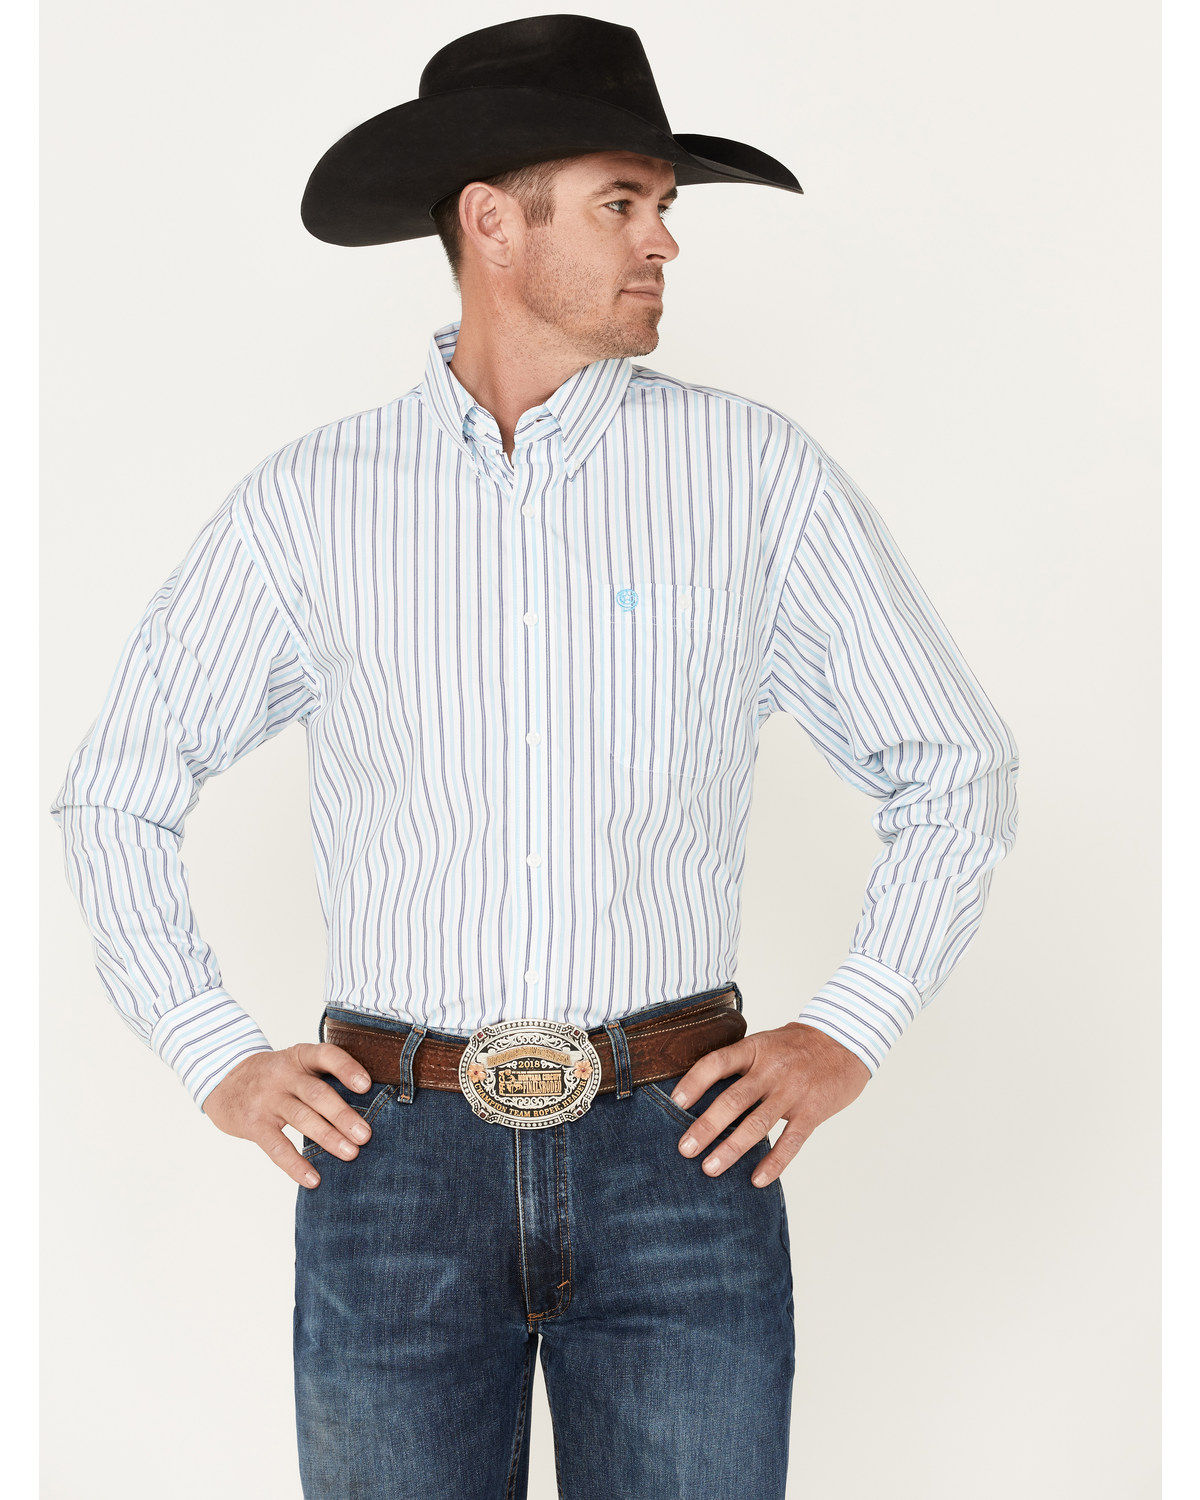 George Strait by Wrangler Men's Striped Long Sleeve Button Down Western Shirt